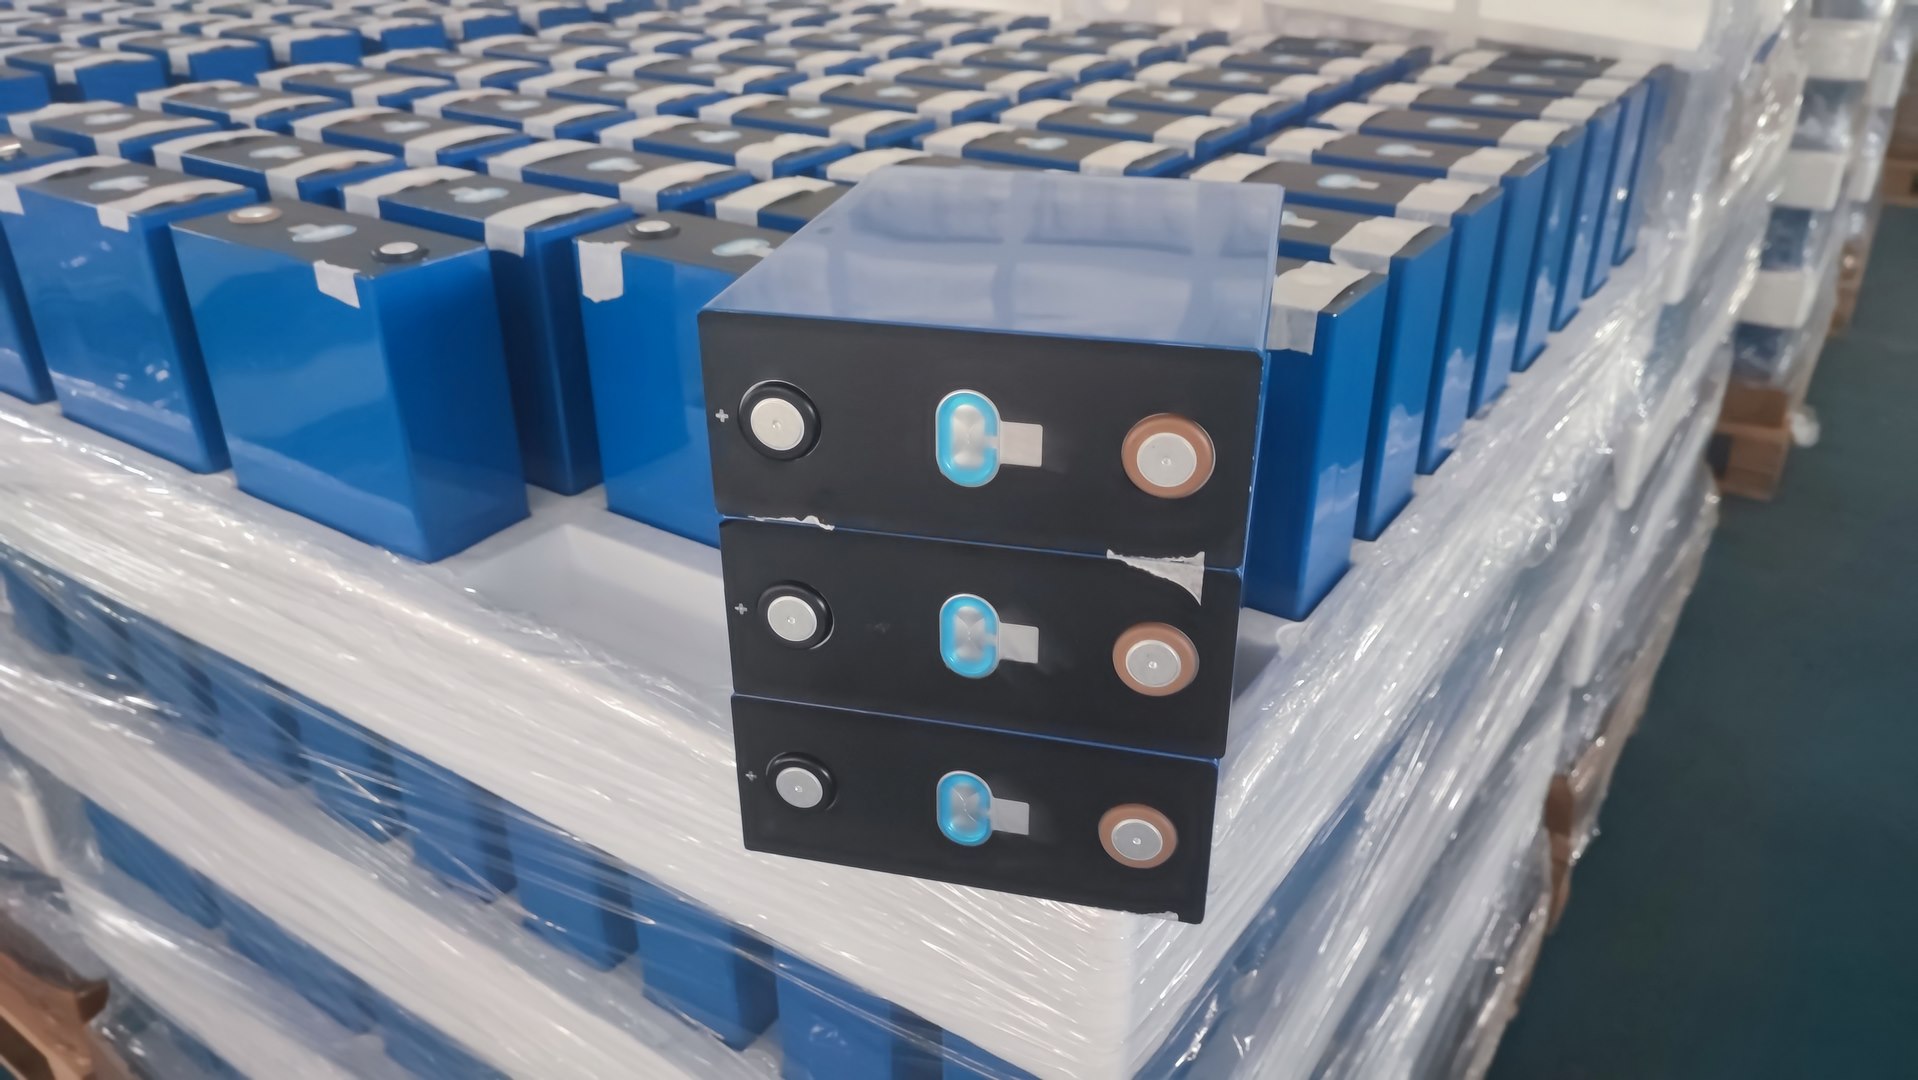 Lifepo4 battery in the lithium manufacturer